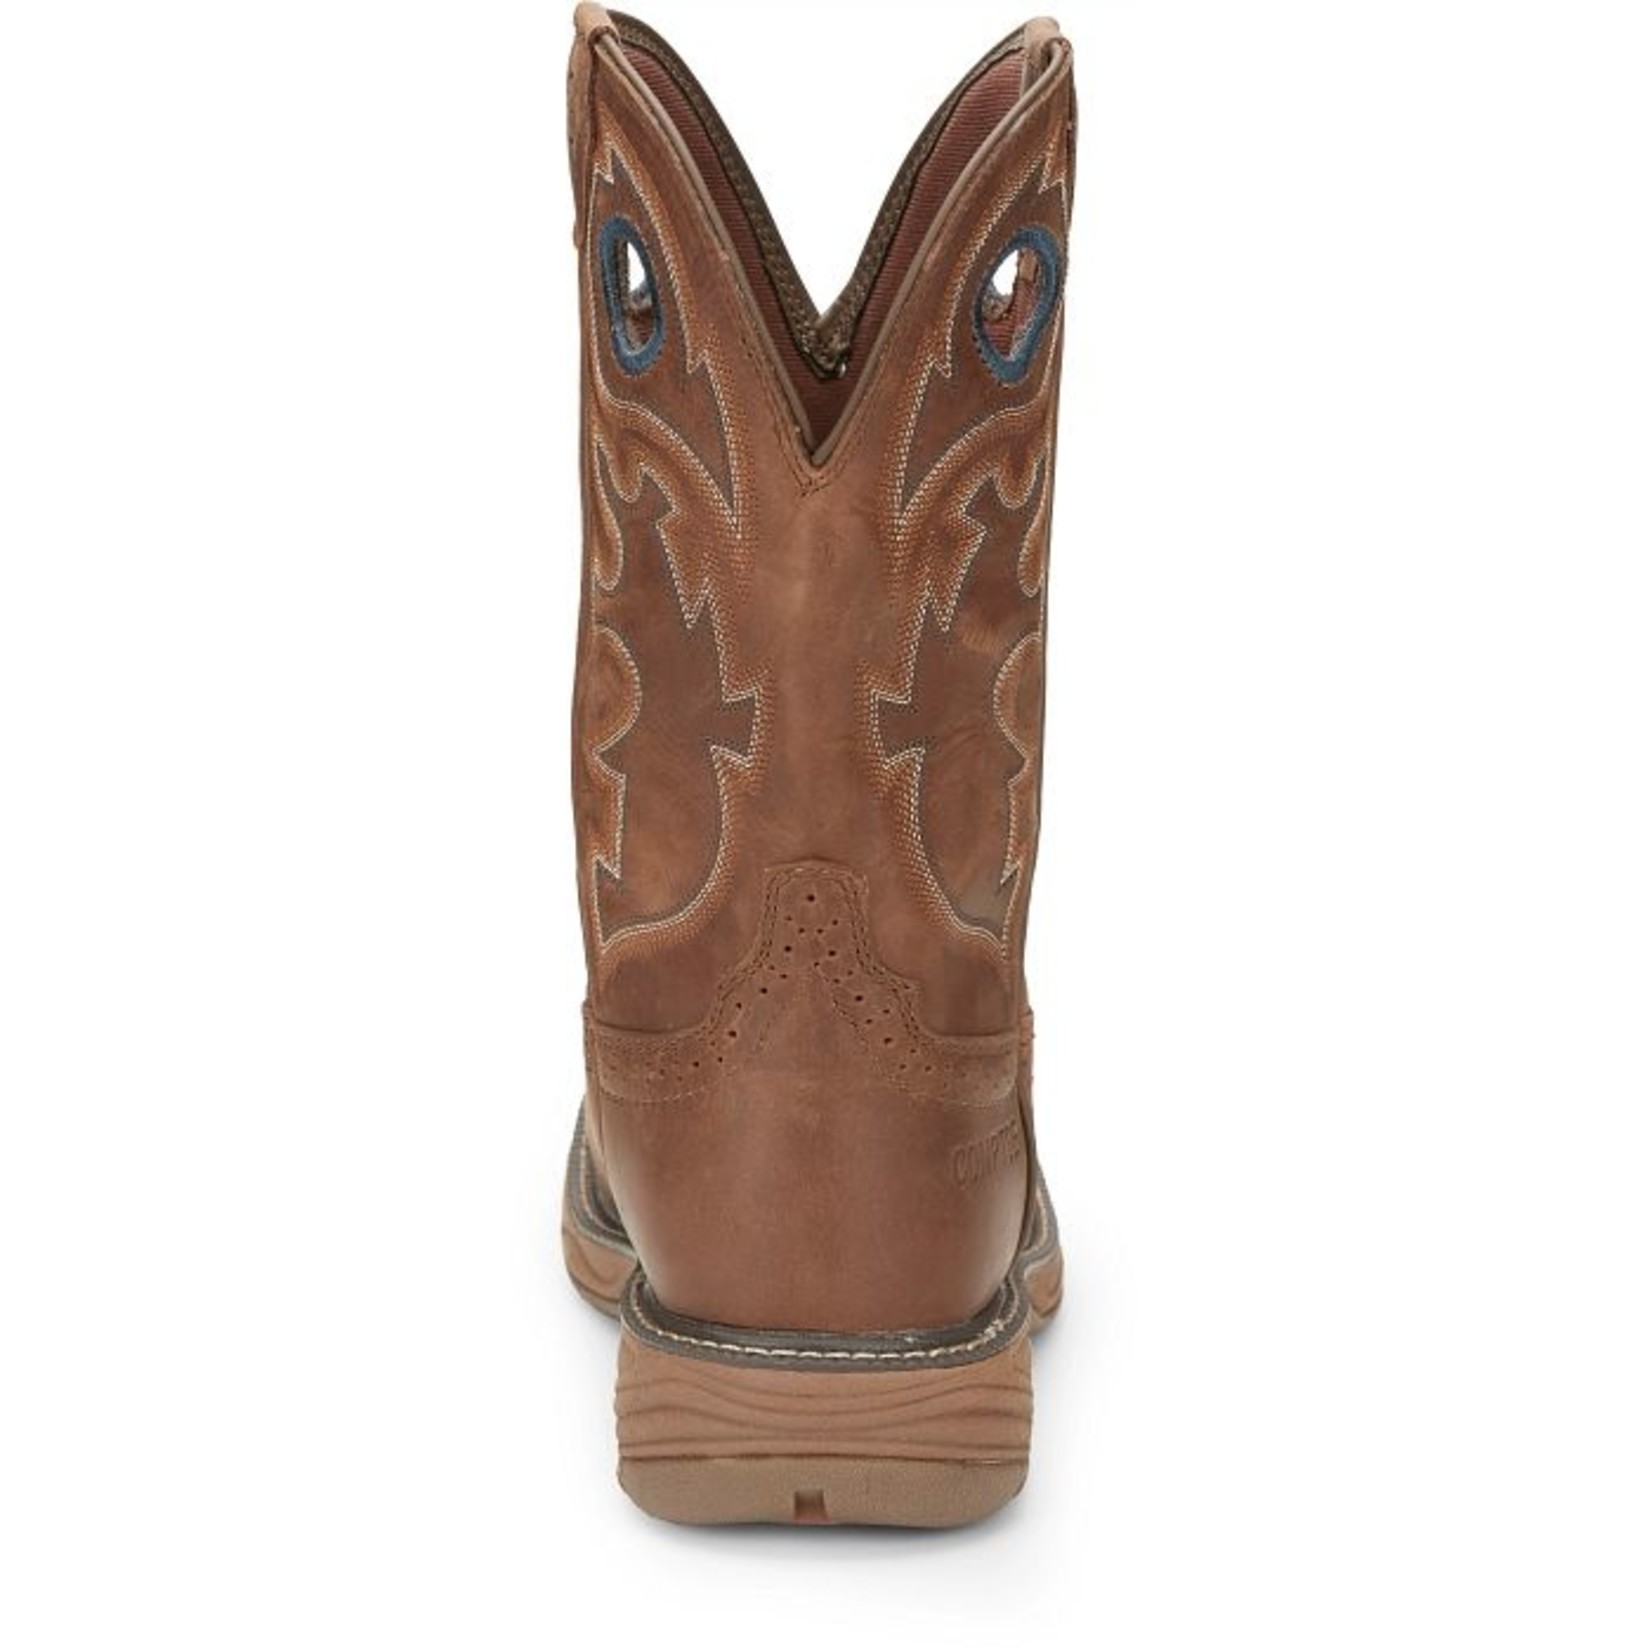 JUSTIN BOOTS 11" RUSH ROUND TOE CT EH WP